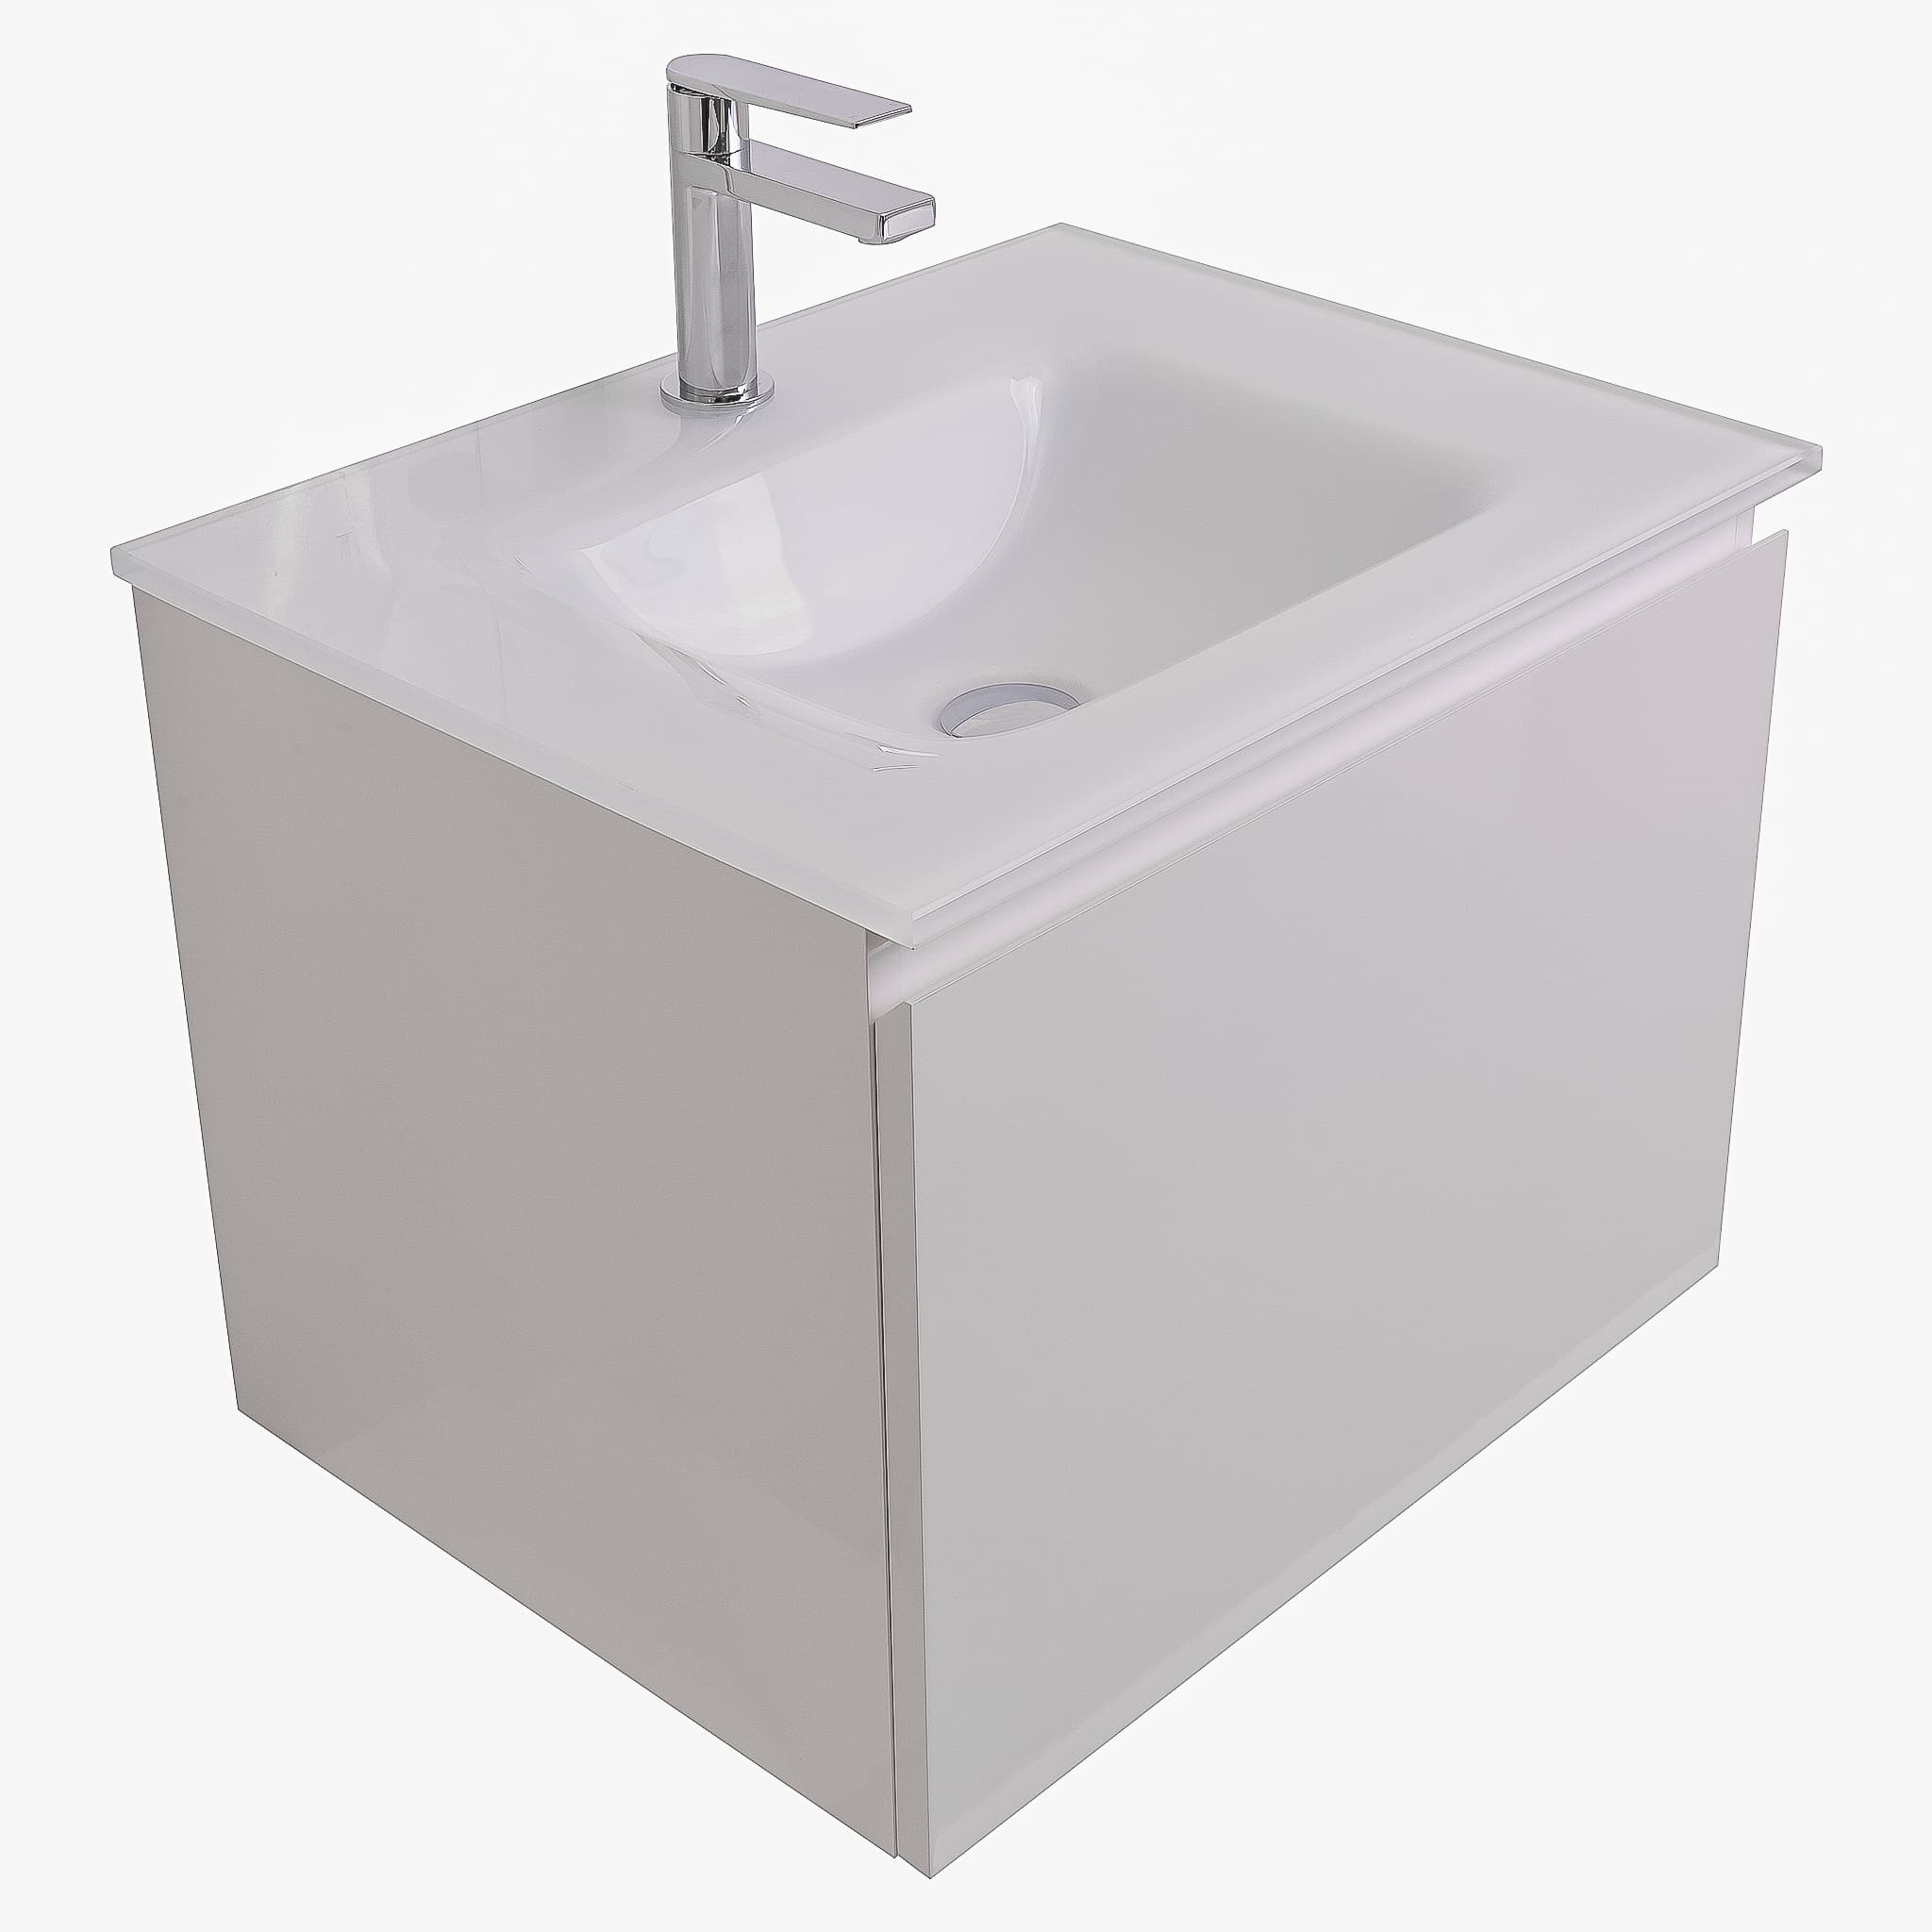 Venice 23.5 White High Gloss Cabinet, White Tempered Glass Sink, Wall Mounted Modern Vanity Set